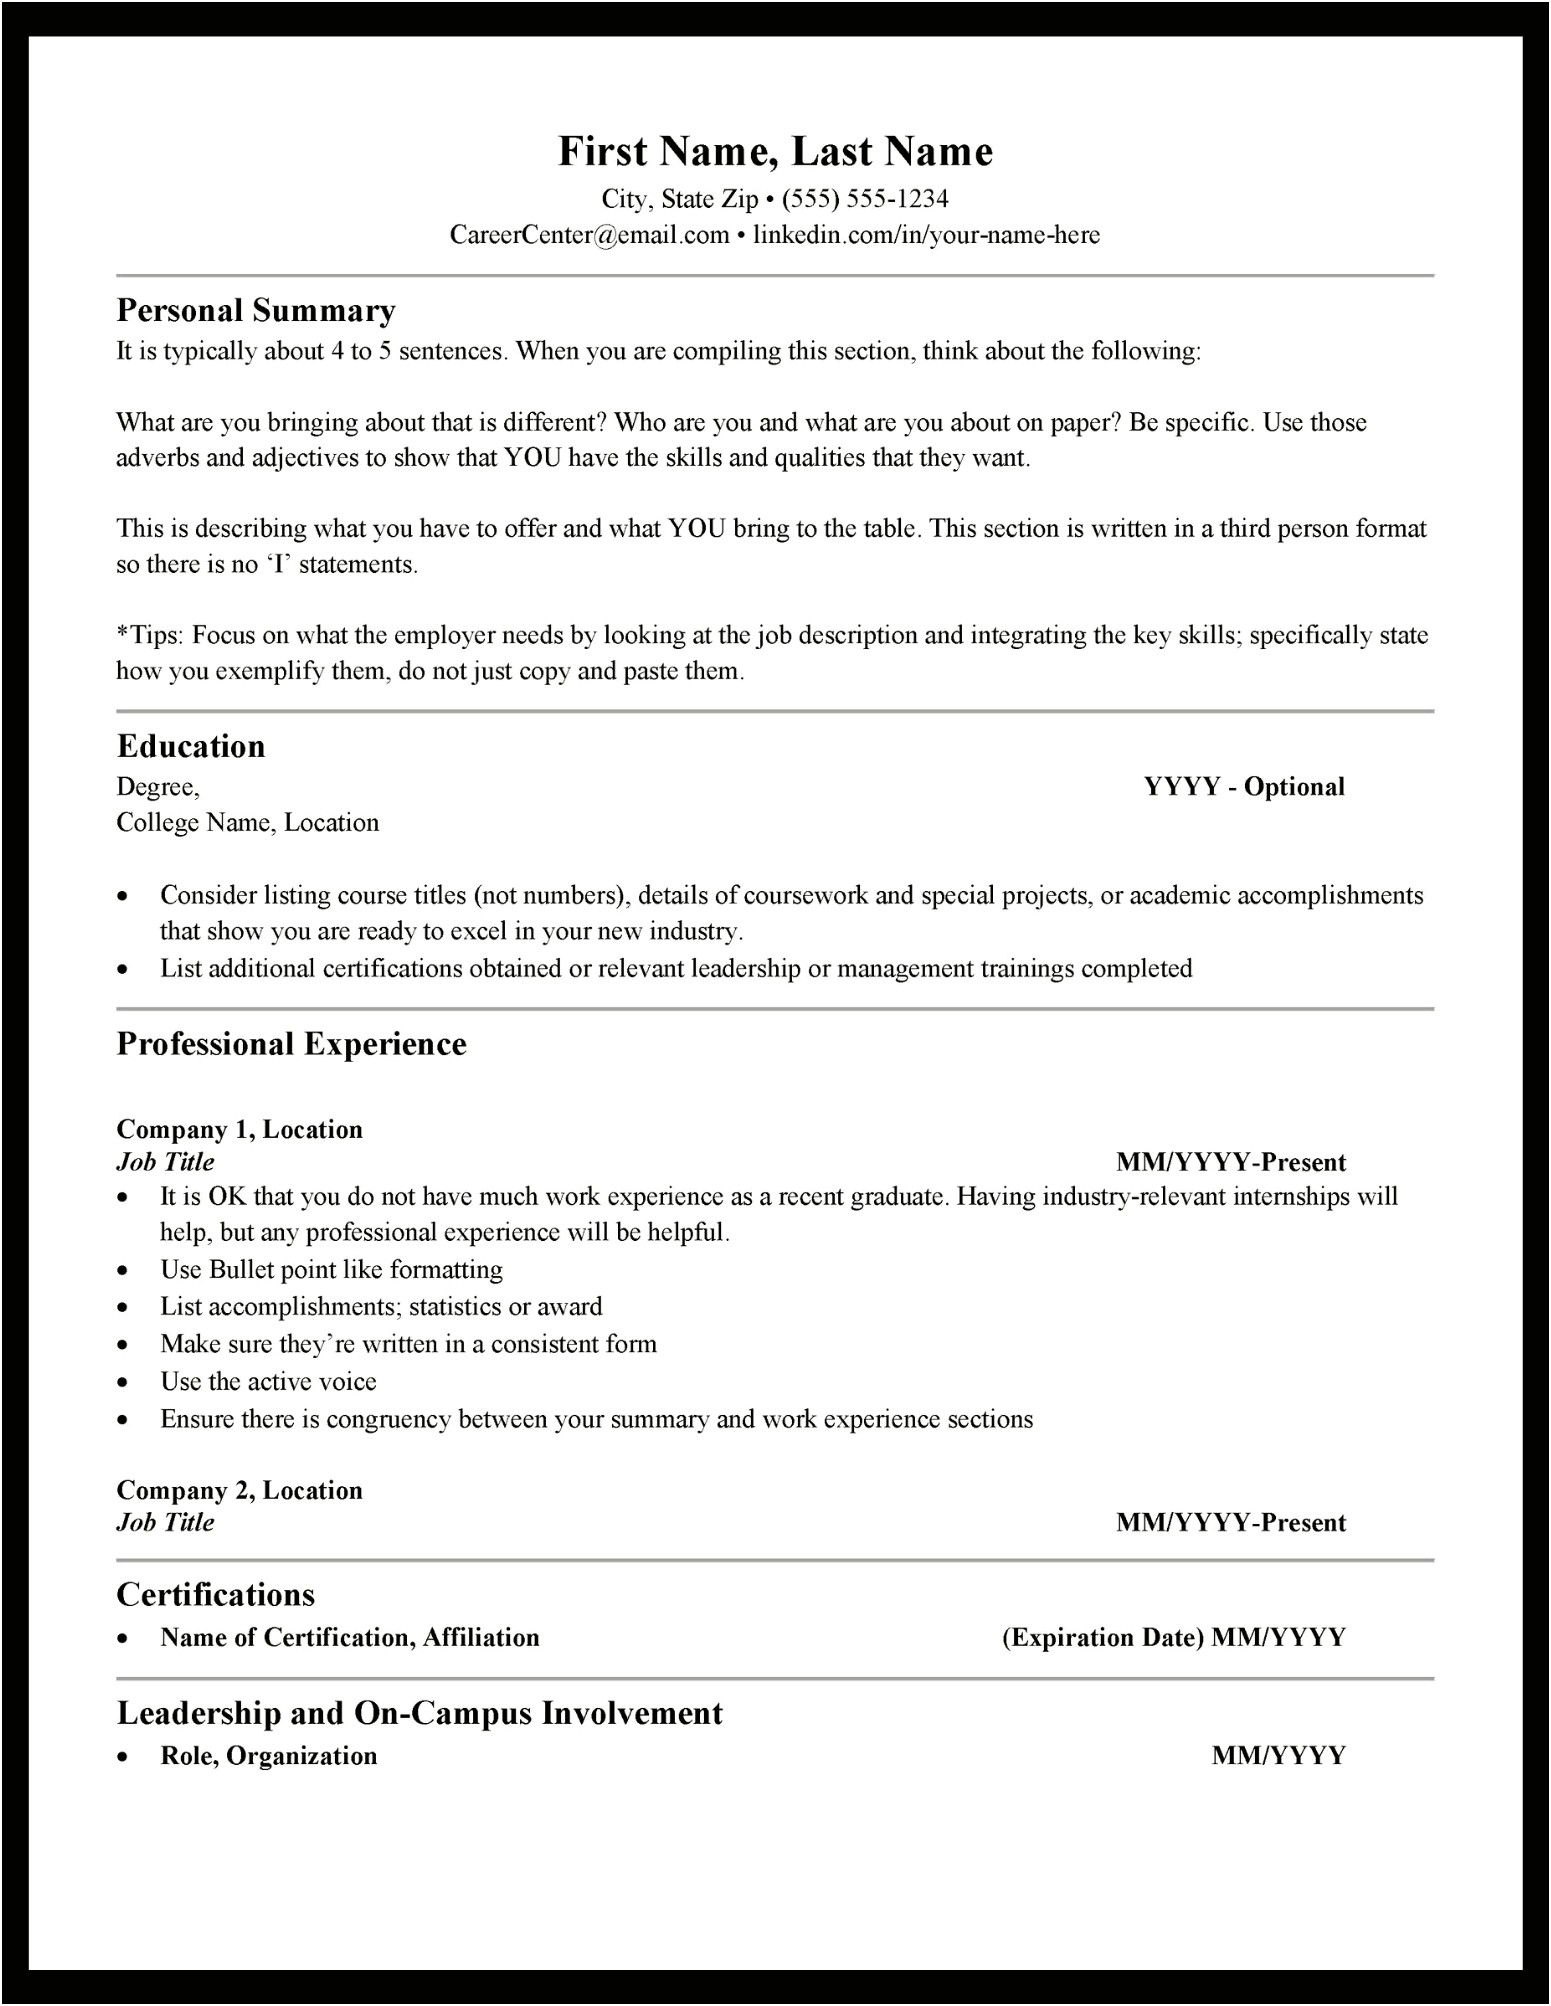 School Section In Resume For Graduate